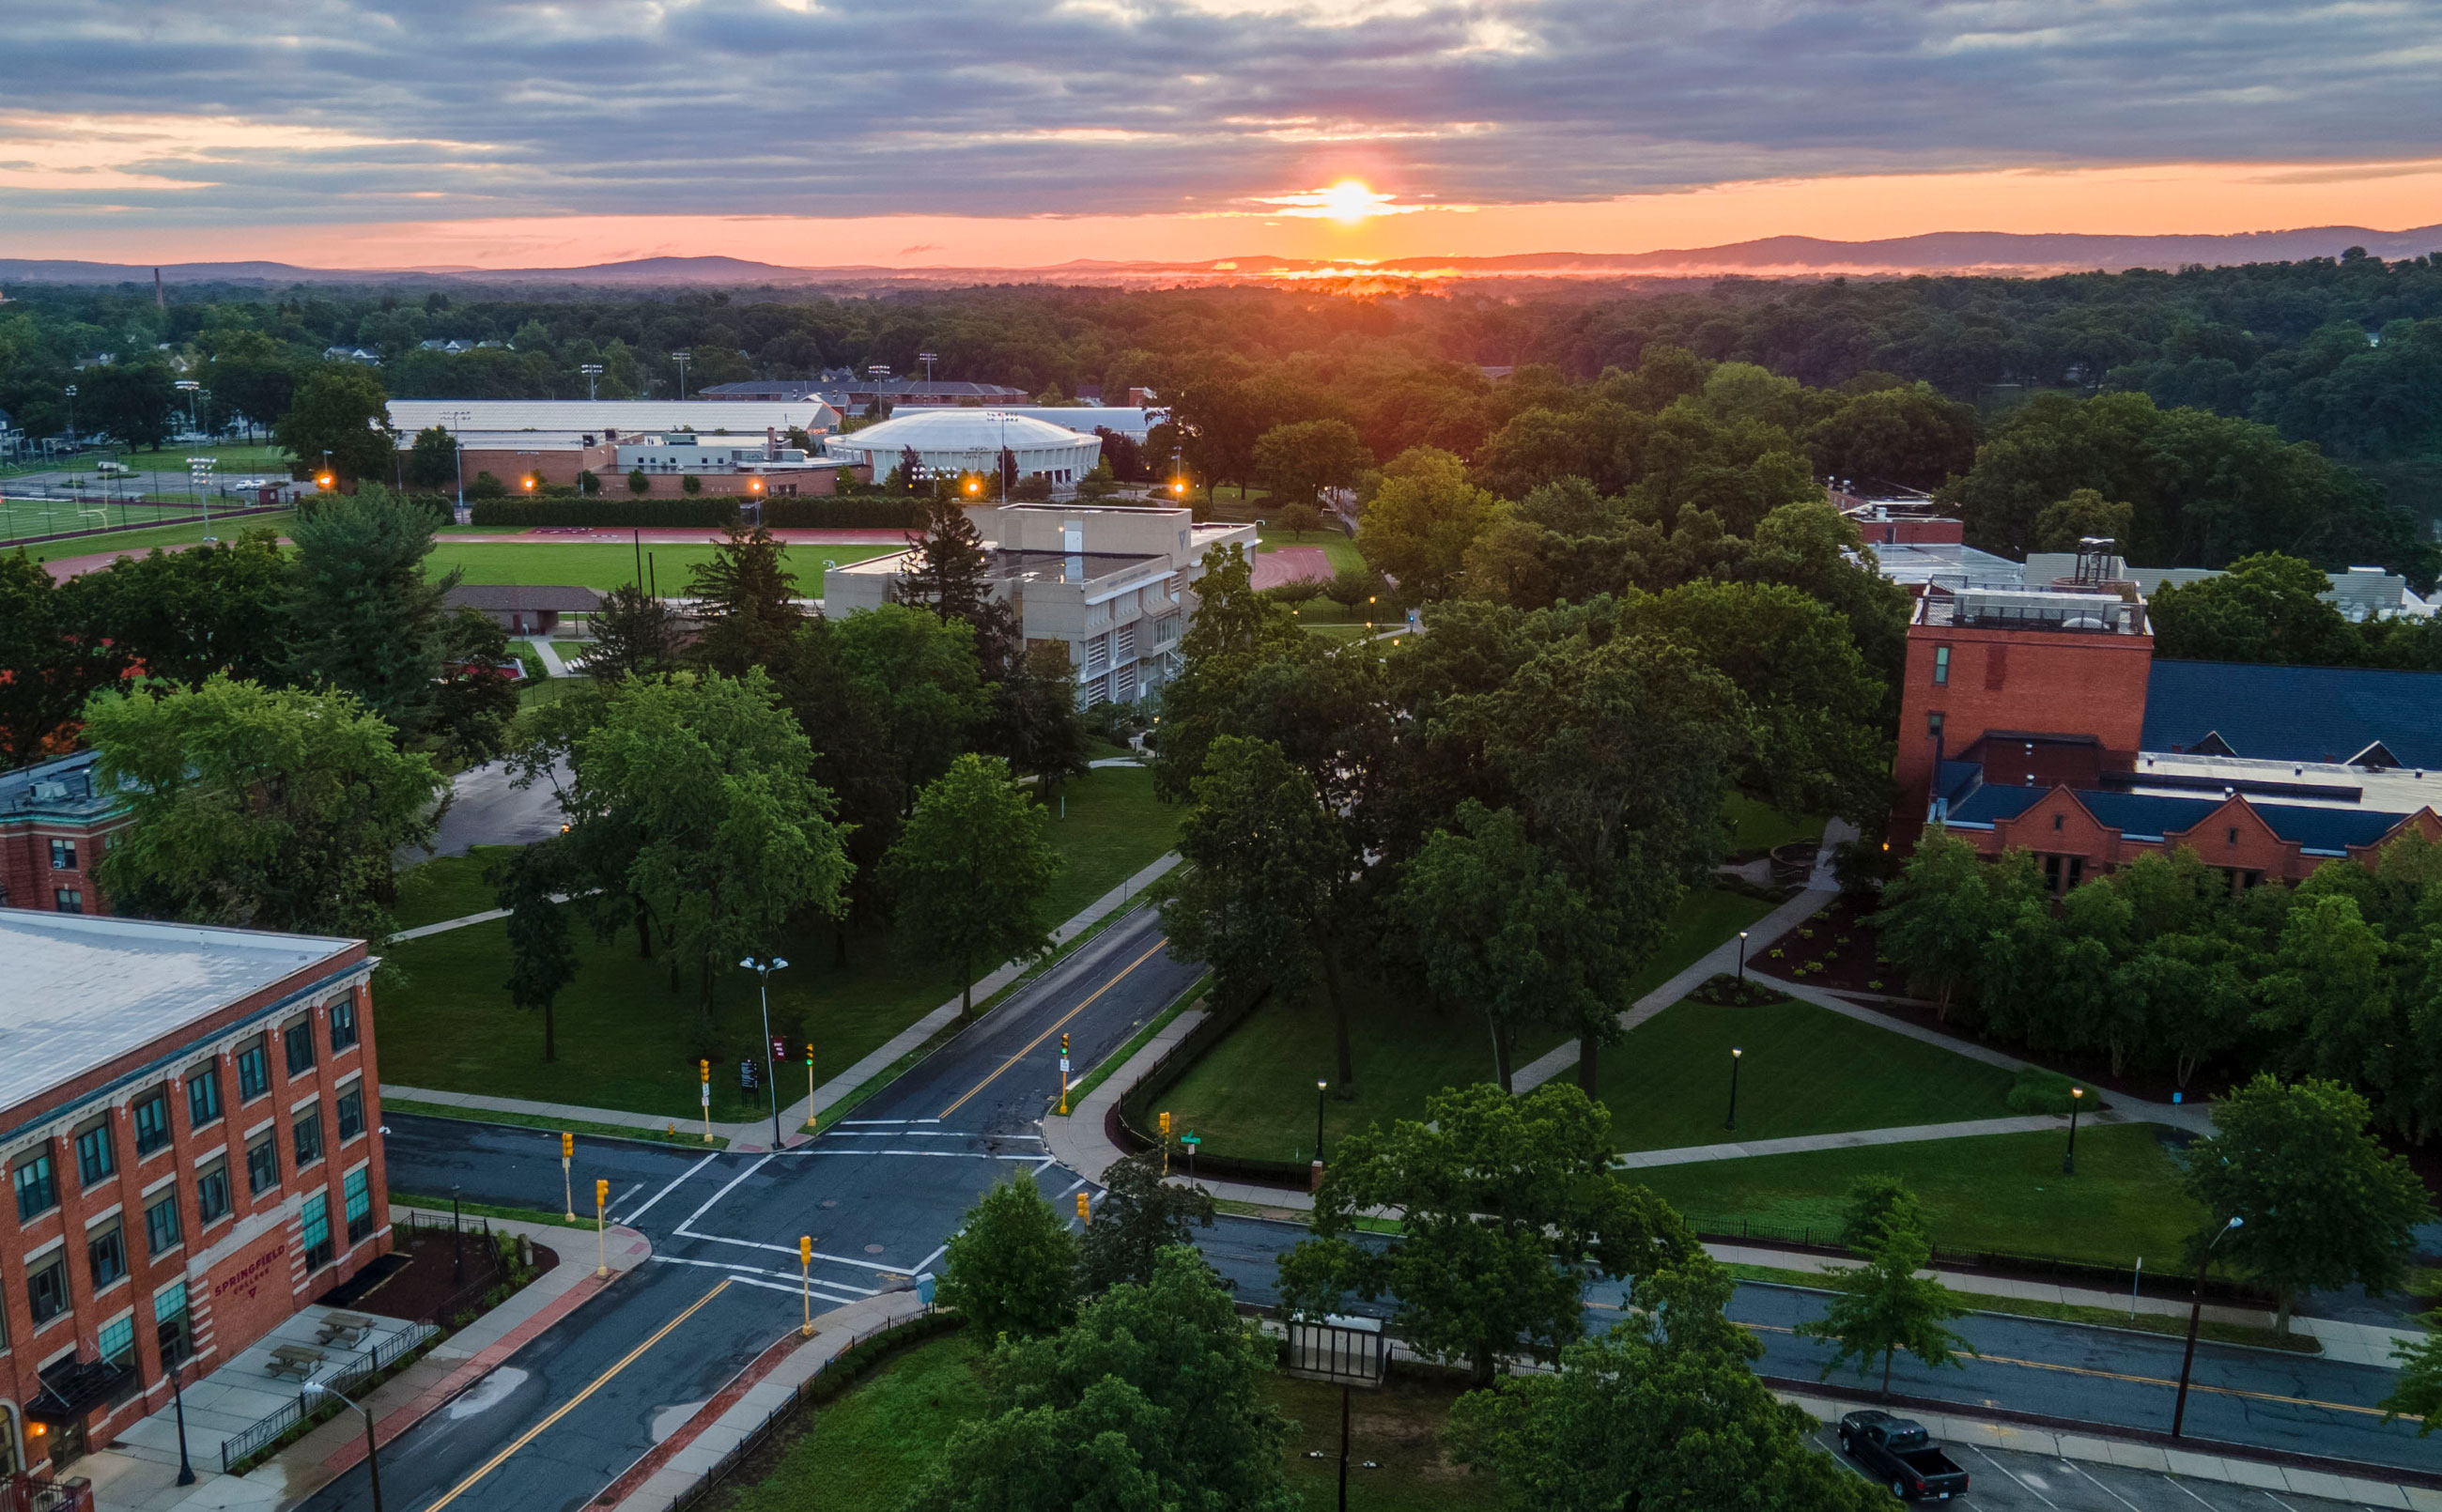 A drone image of a sunrise over campus